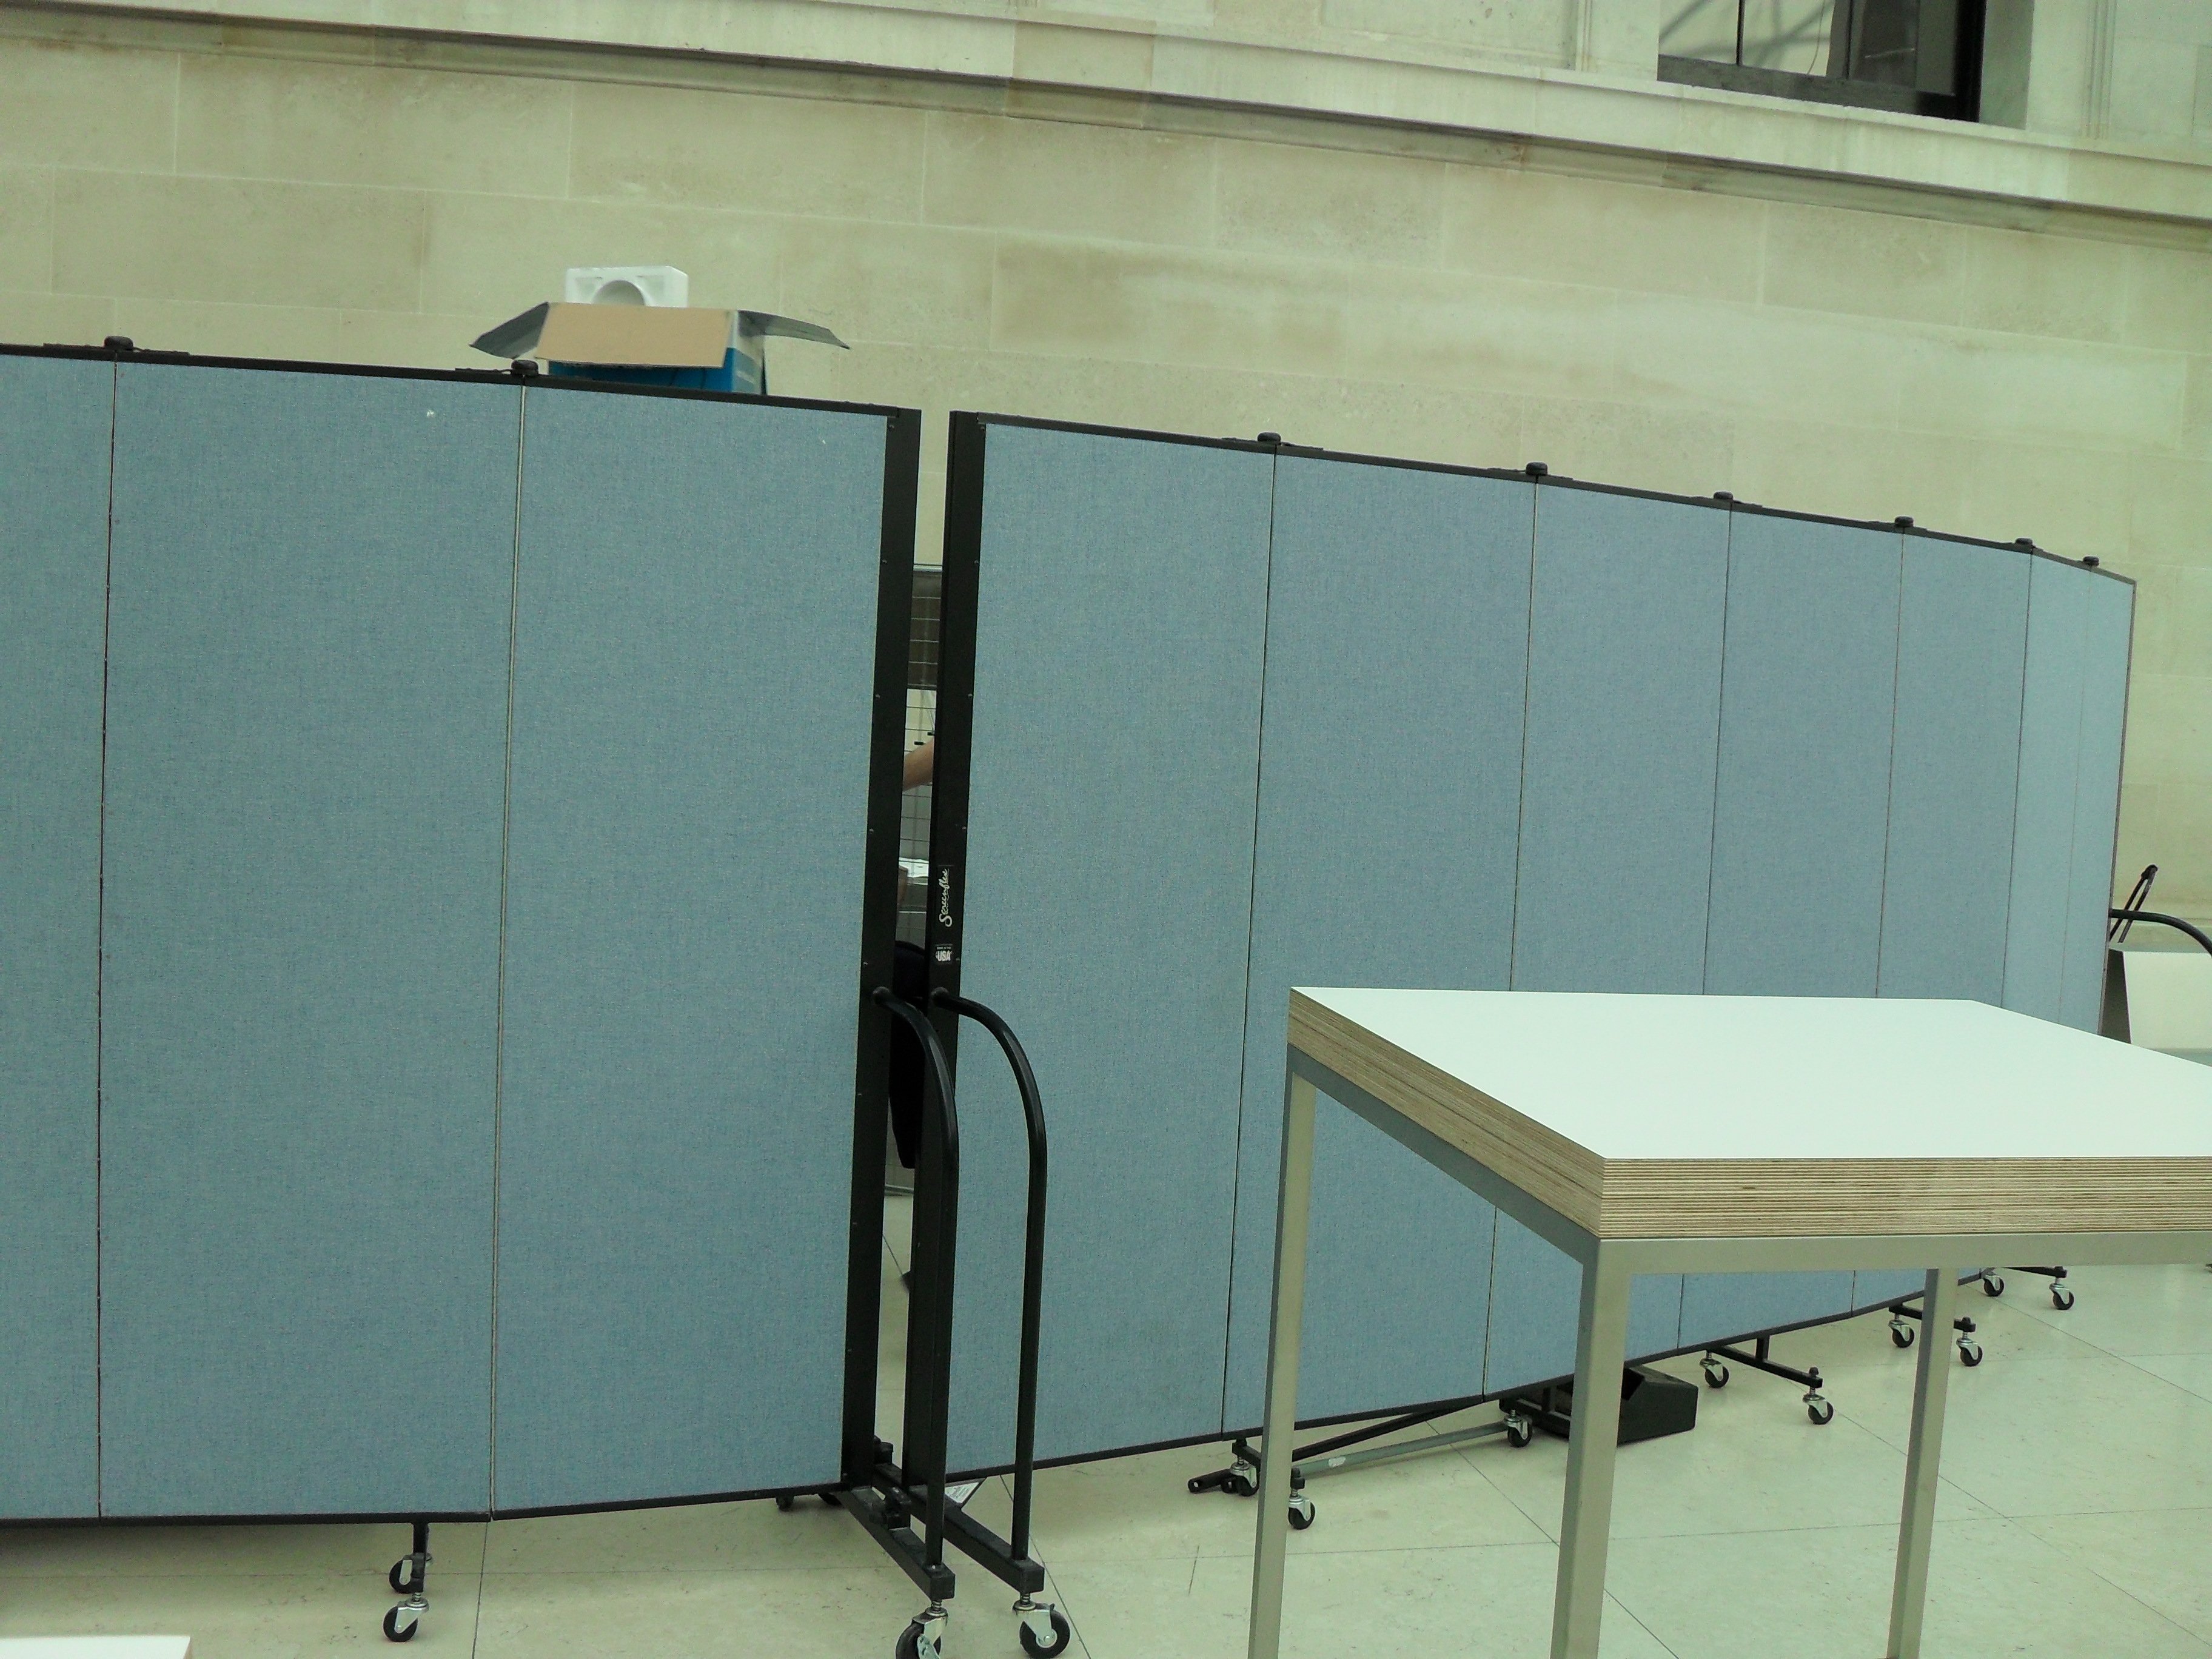 Screenflex Room Divider restrict access to a storage area in a room.